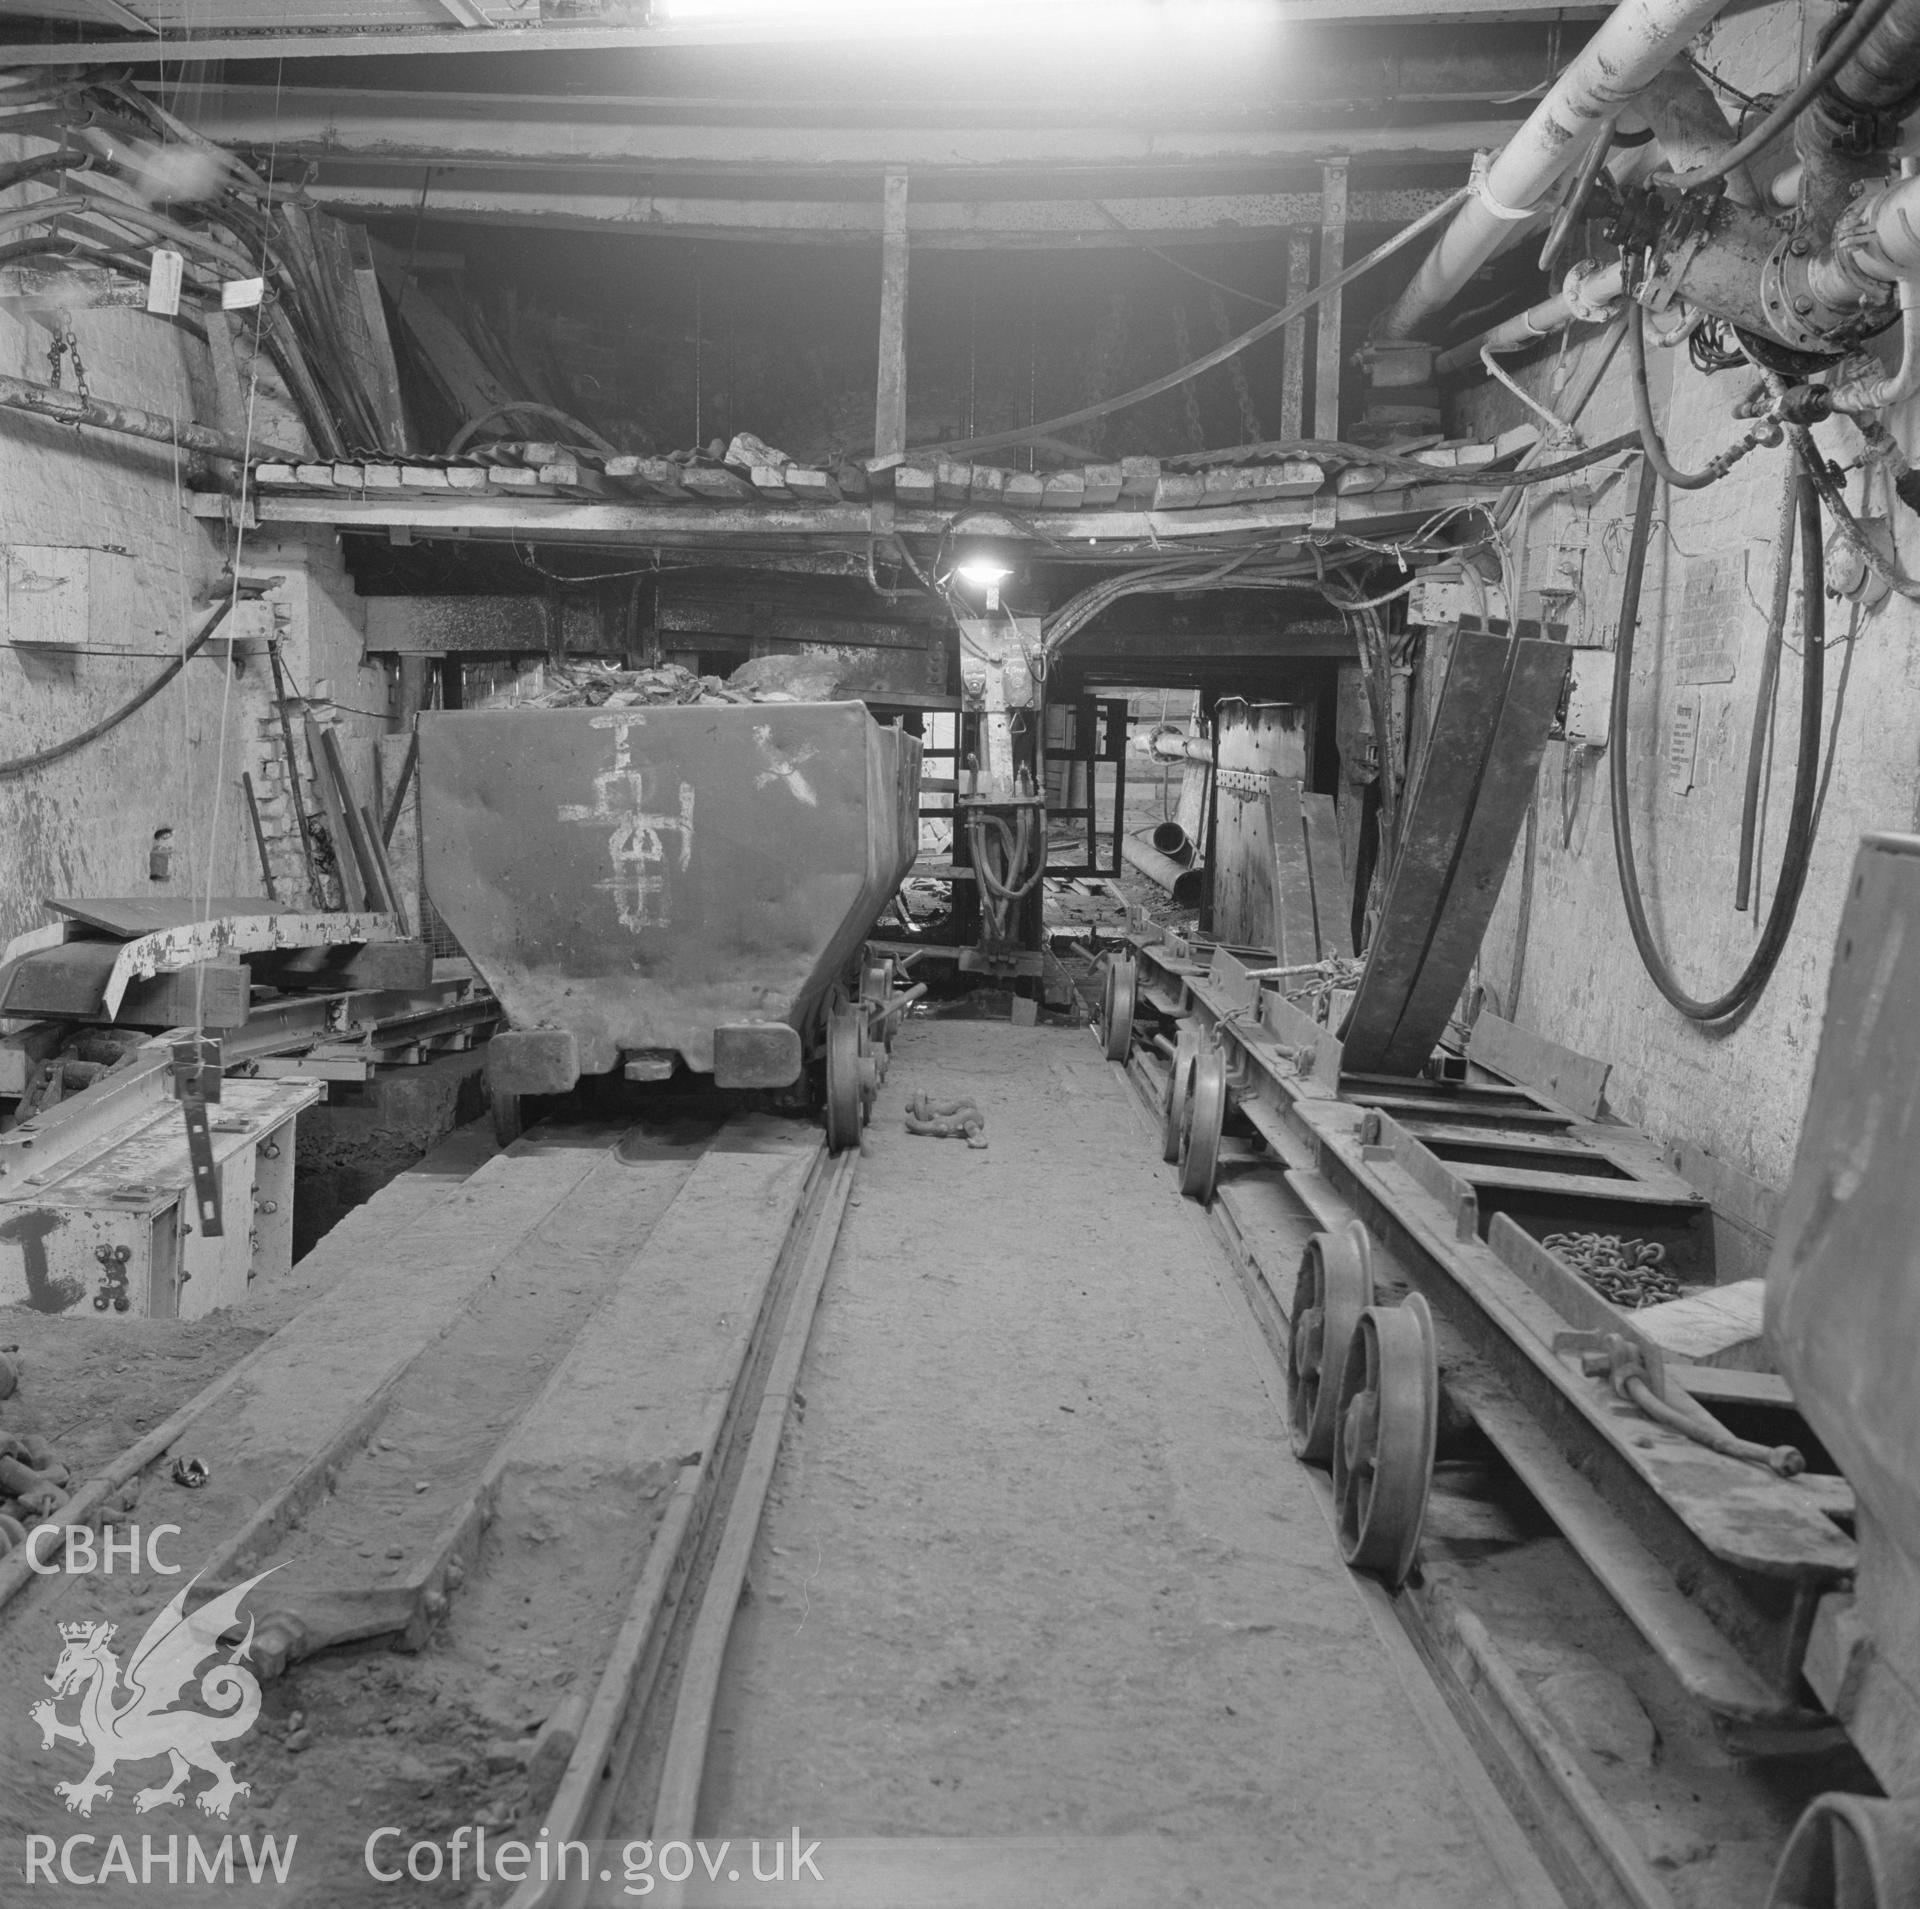 Digital copy of an acetate negative showing Blaenserchan Colliery - pit bottom downcast shaft, from the John Cornwell Collection.